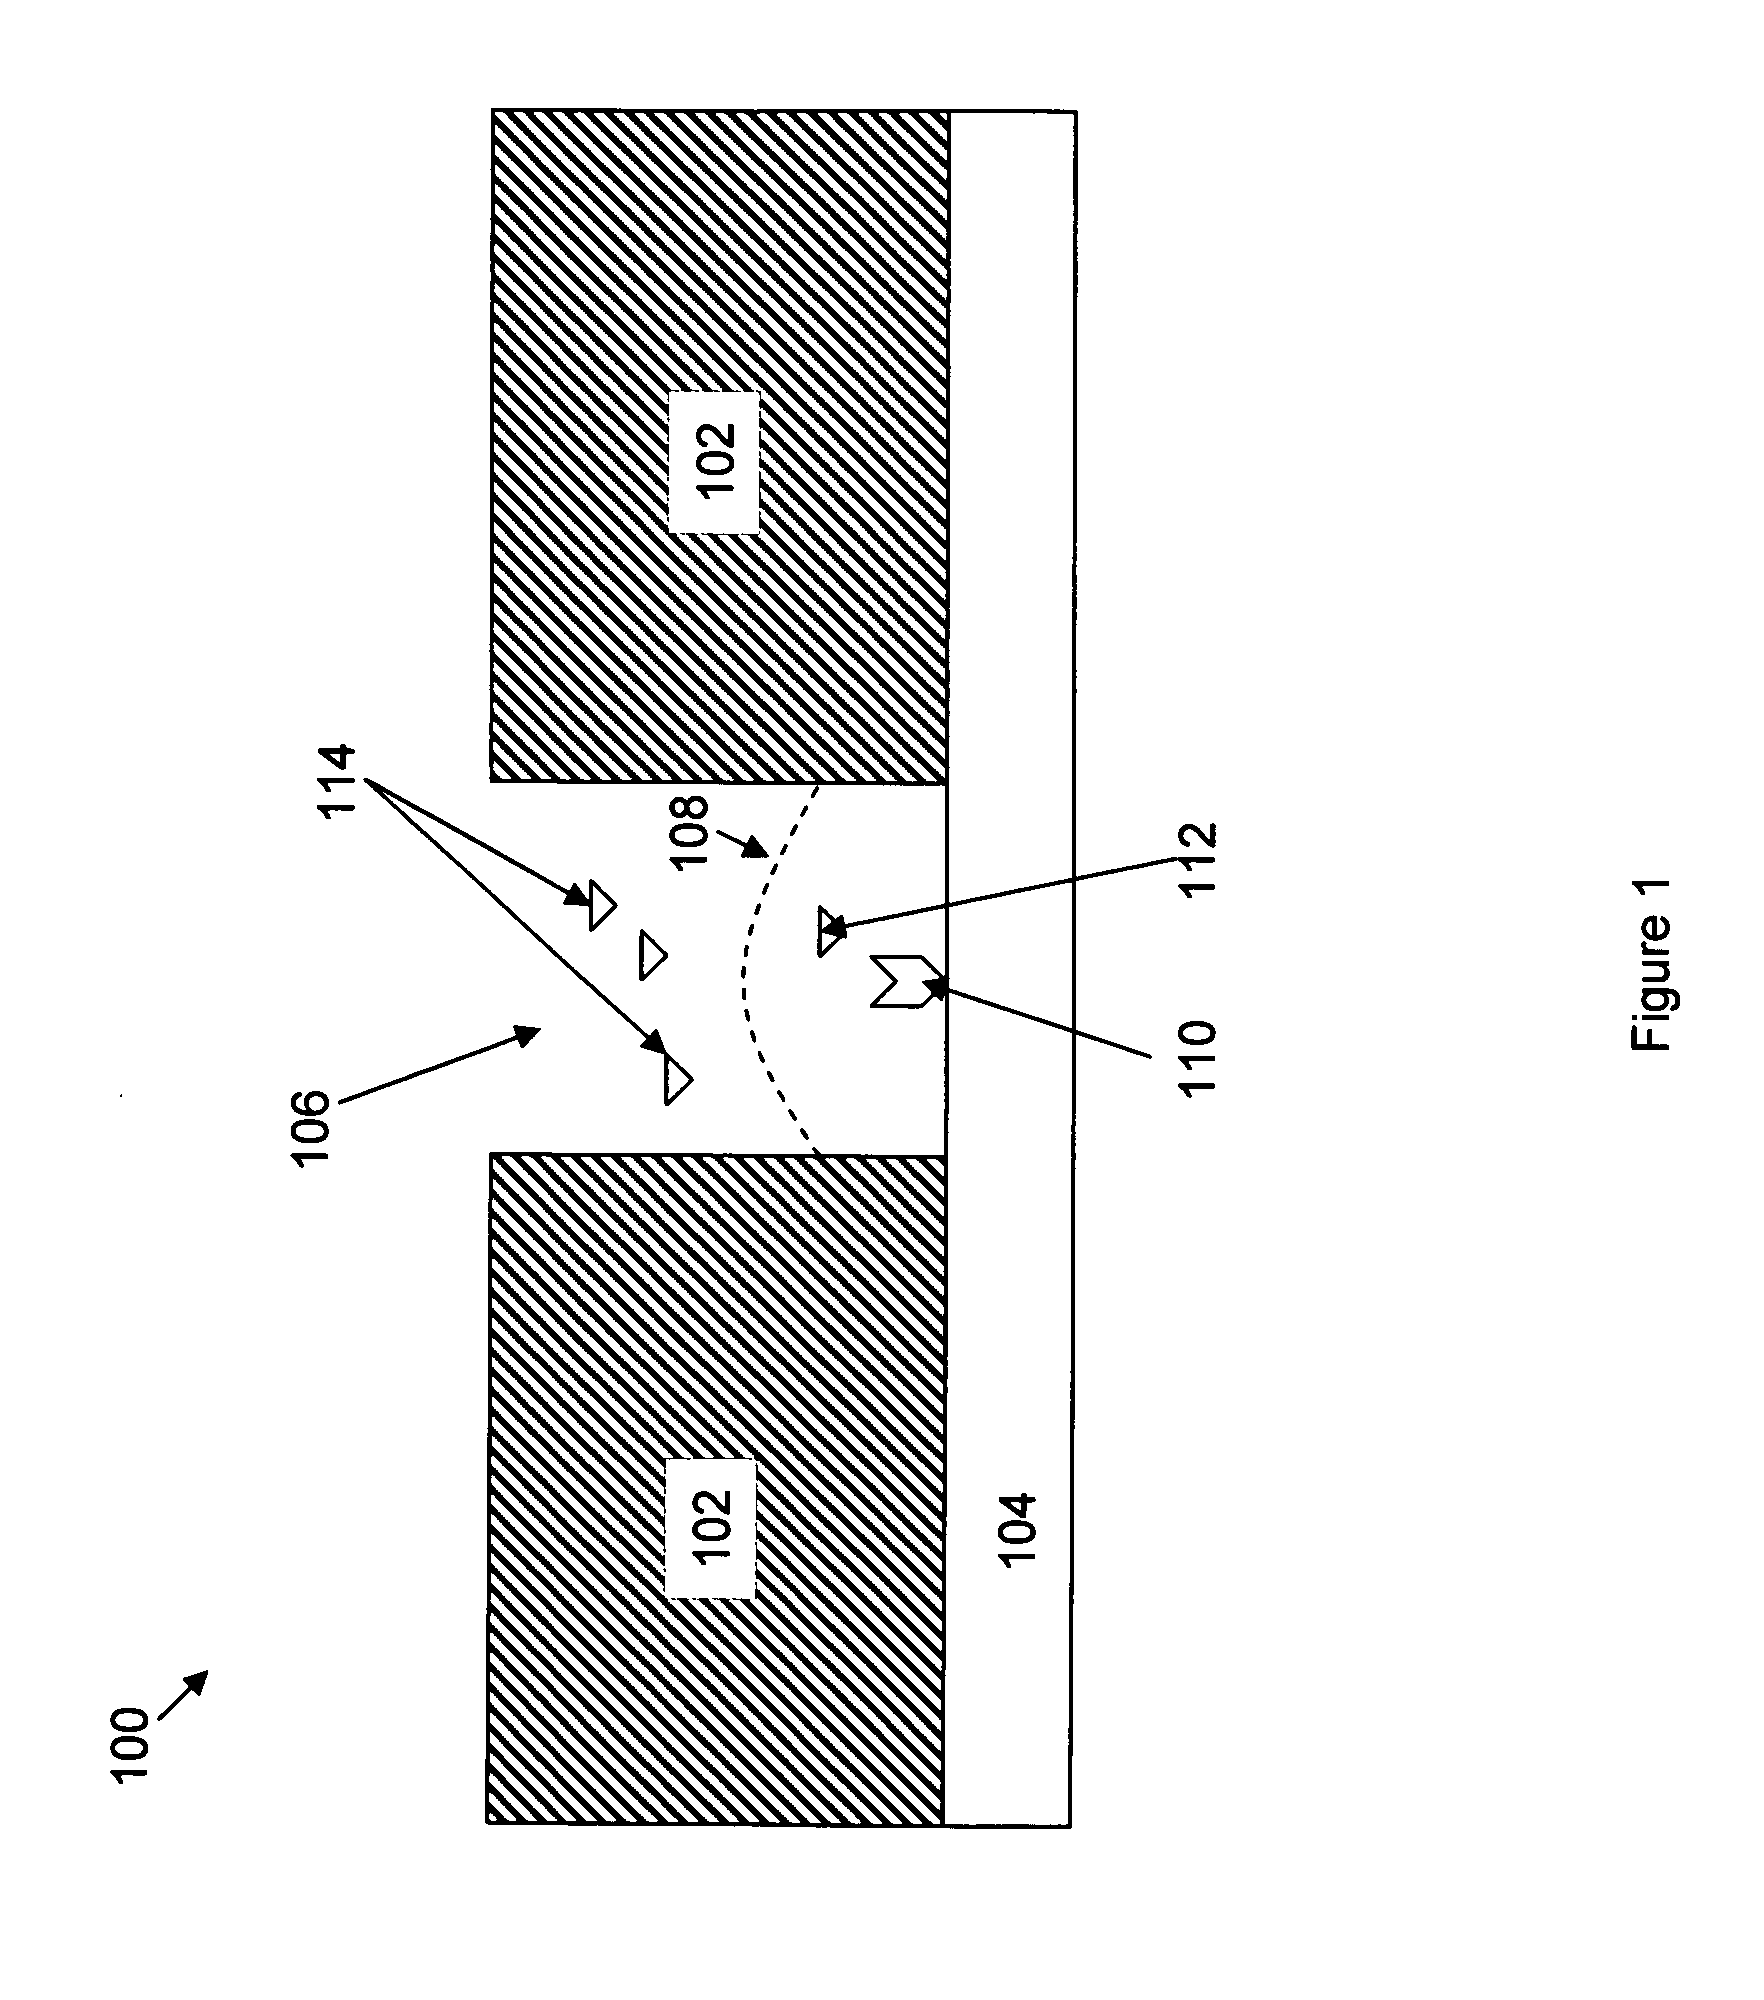 Articles having localized molecules disposed thereon and methods of producing same